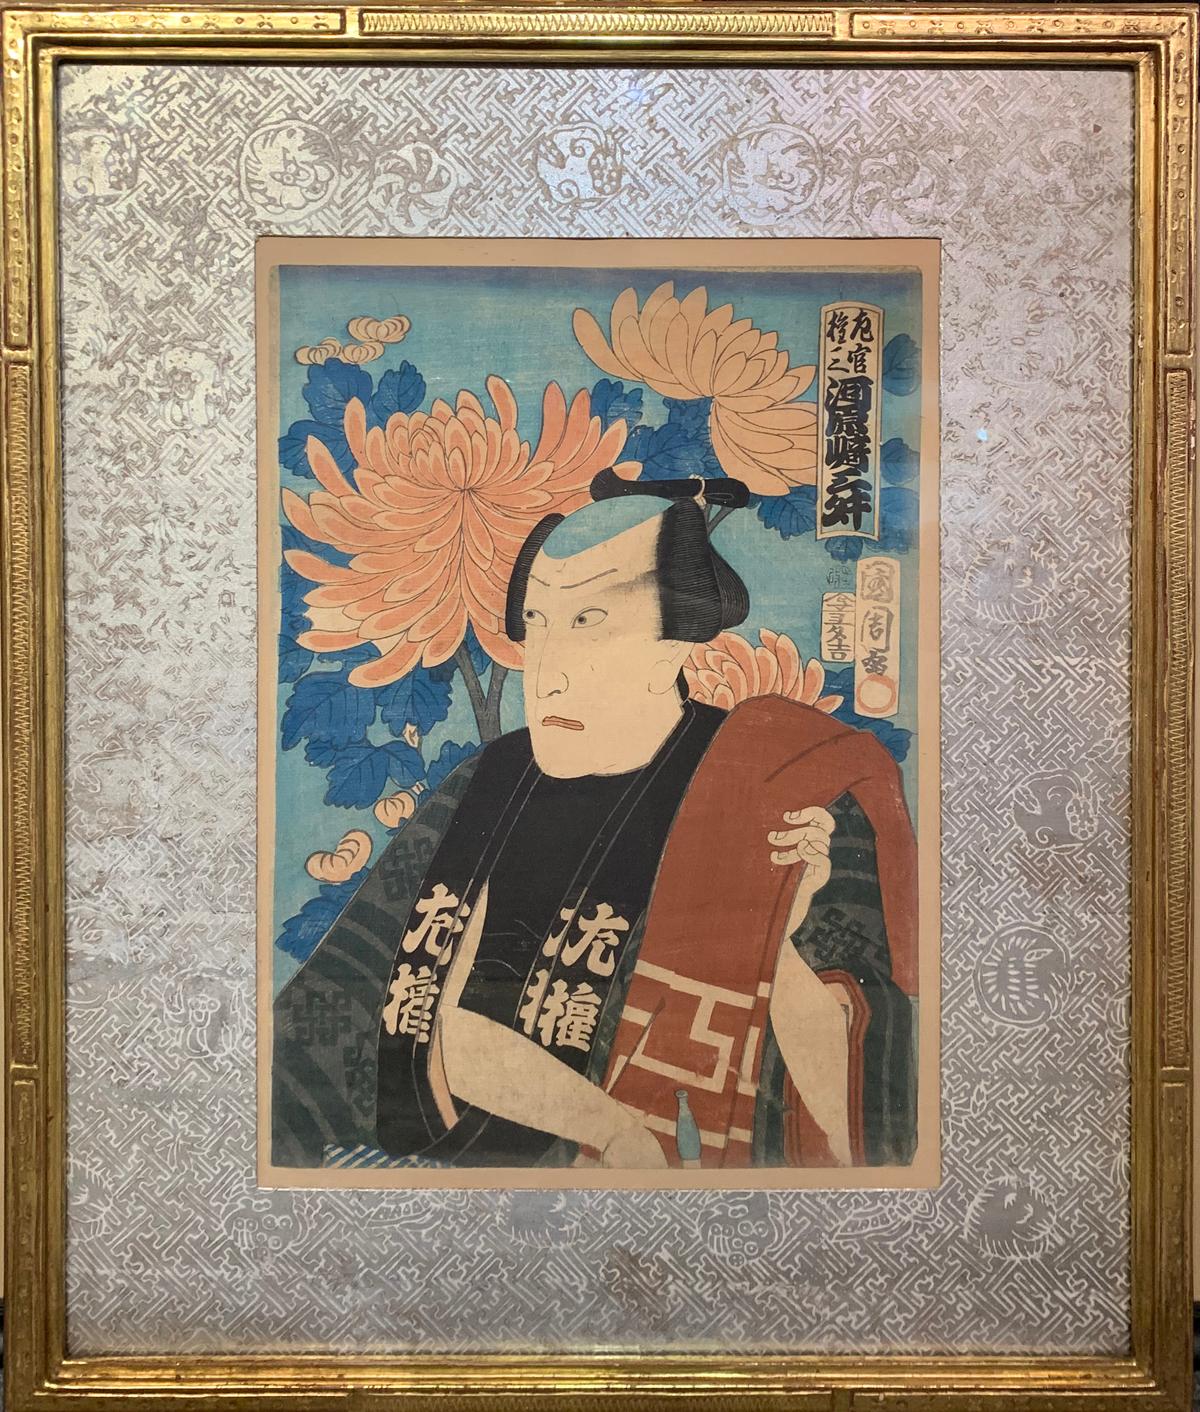 Unknown Portrait Print - Japanese Print from Watercolor Original in Gold Leaf Frederick Harer Frame